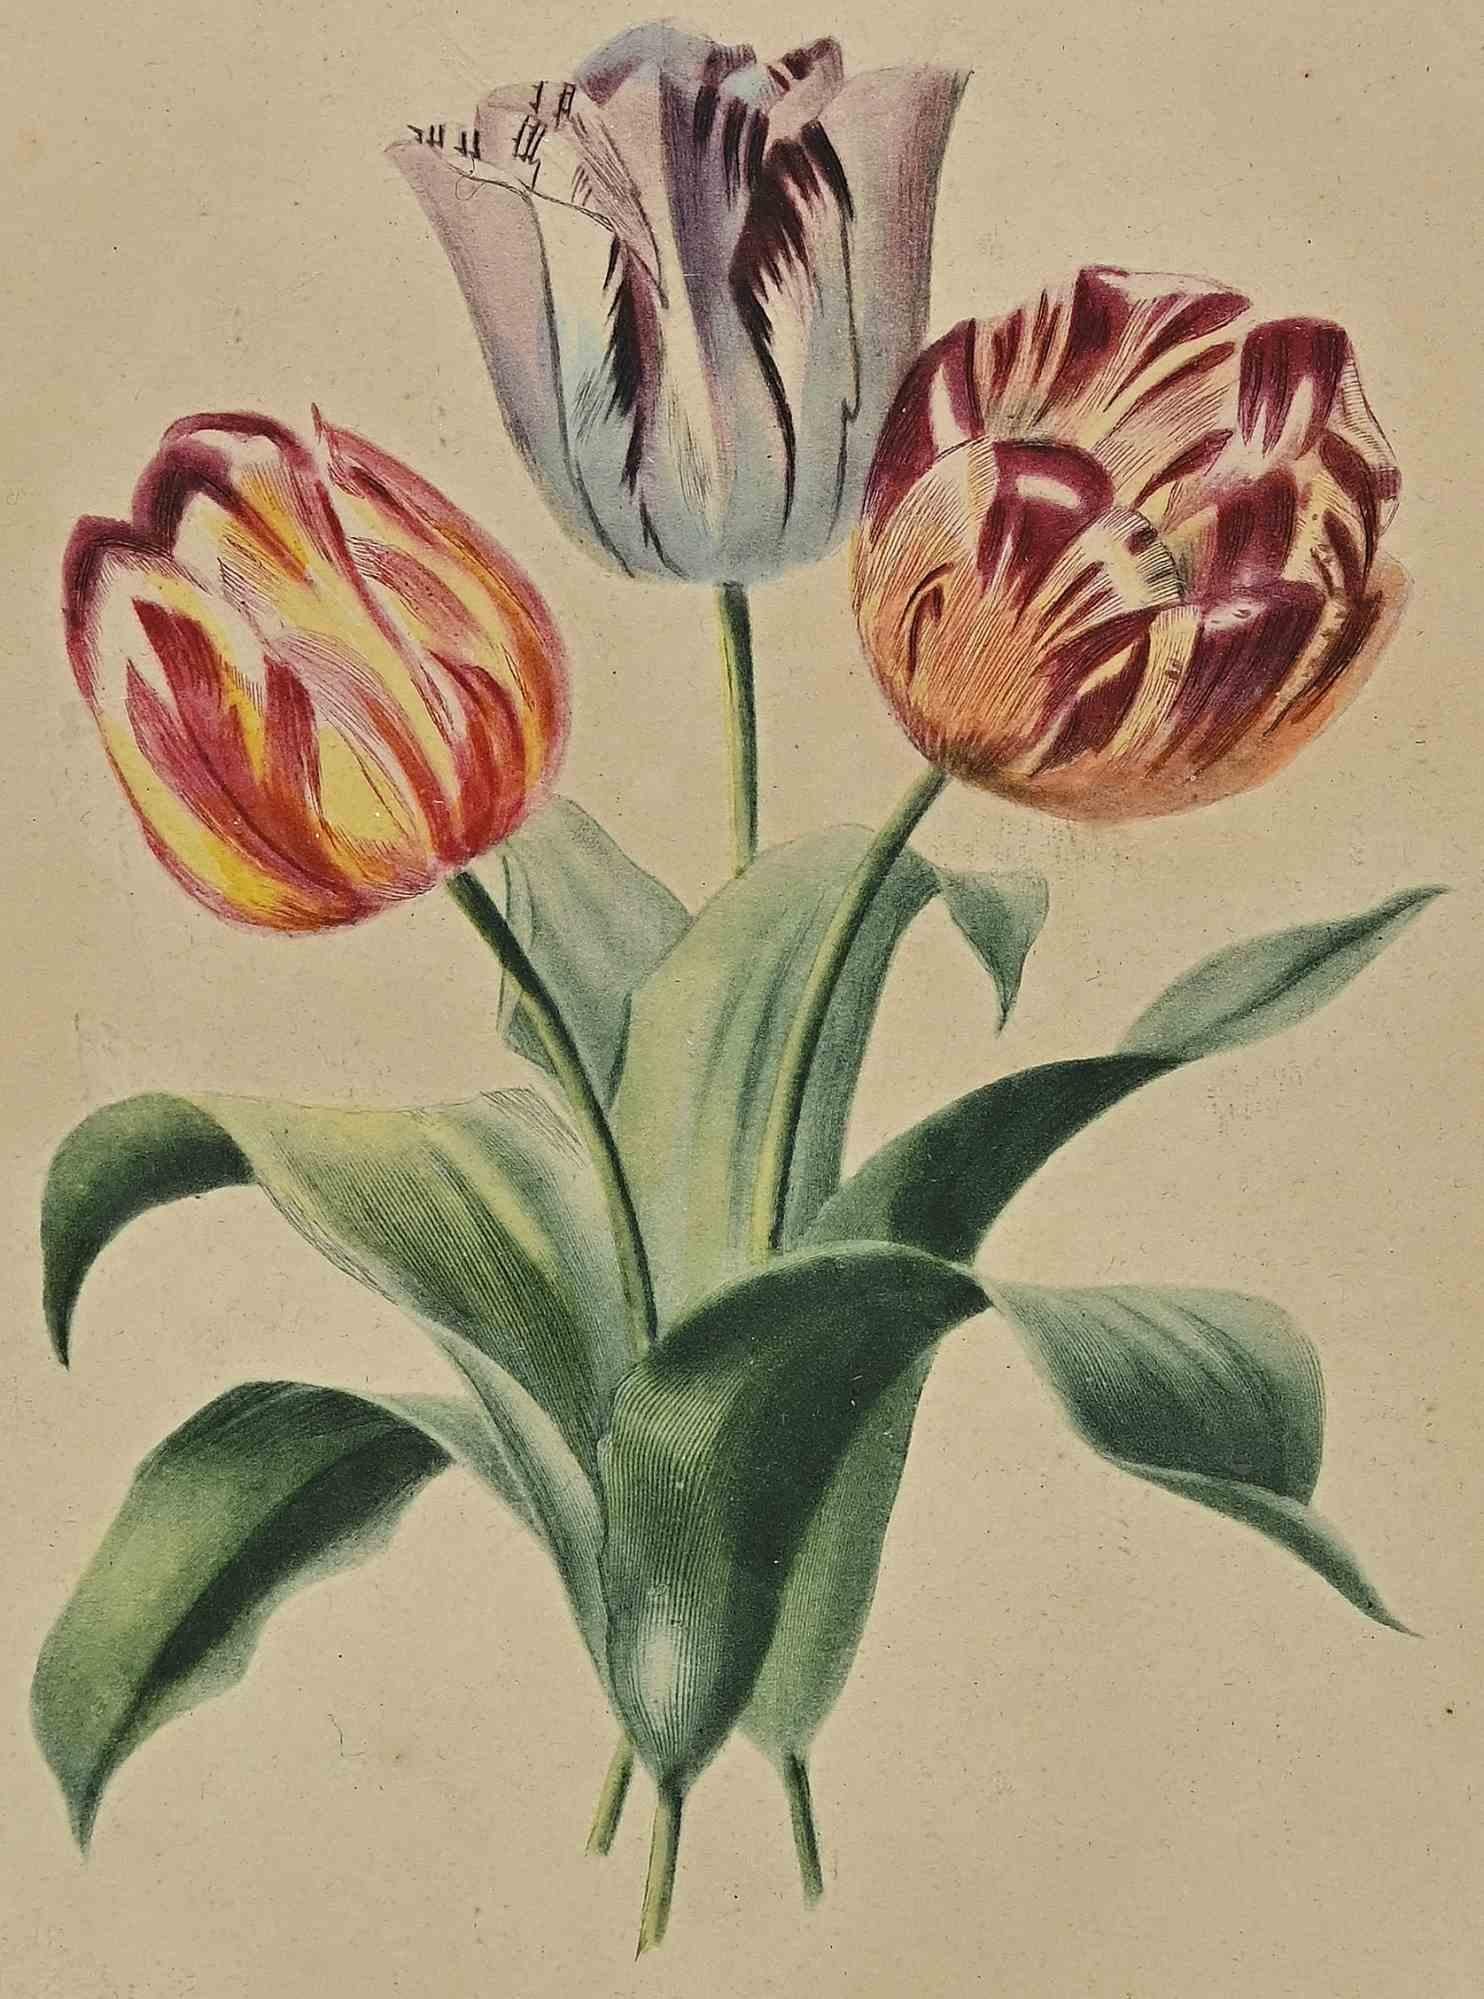 Tulips is a modern artwork realized by Edouard Maubert in 19th Century.

Hand colored etching.

Includes frame.

Good conditions (yellowing of paper).